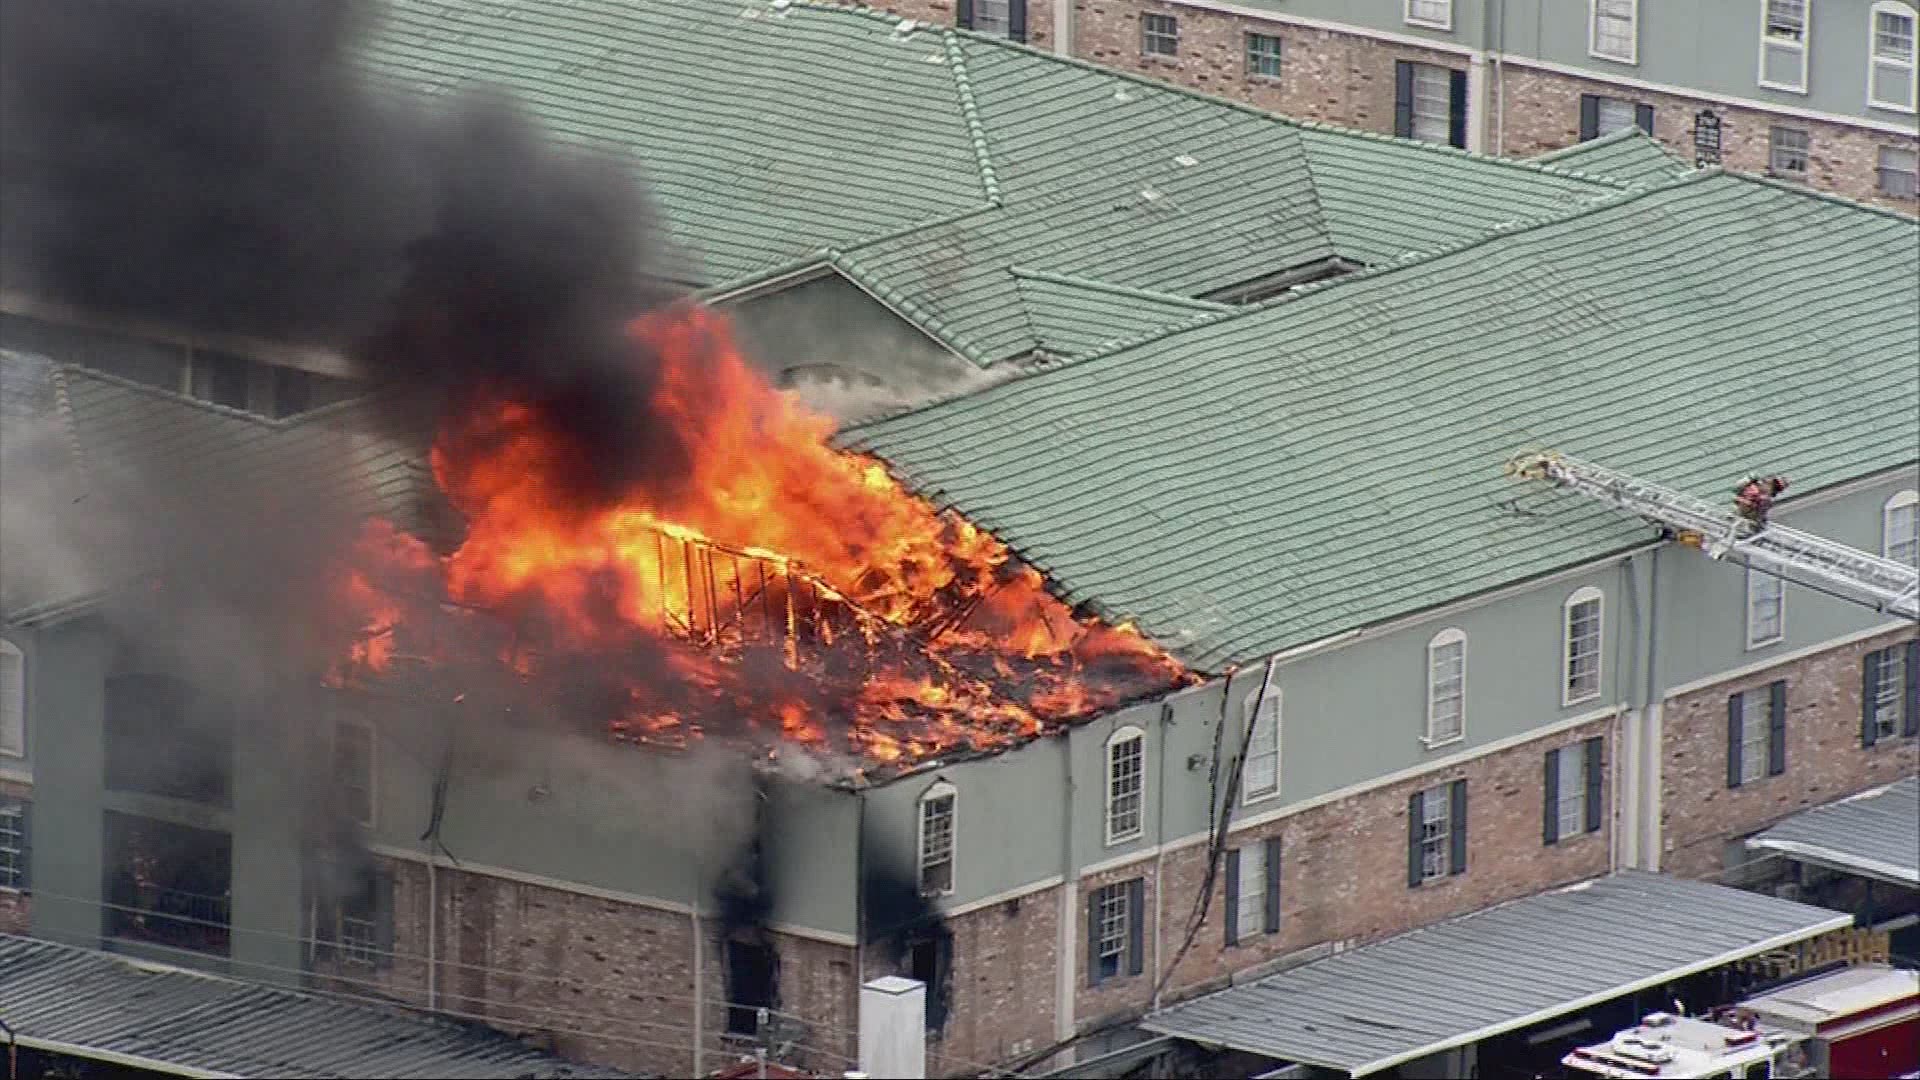 Firefighters battled a three-alarm apartment fire in west Houston Friday afternoon.